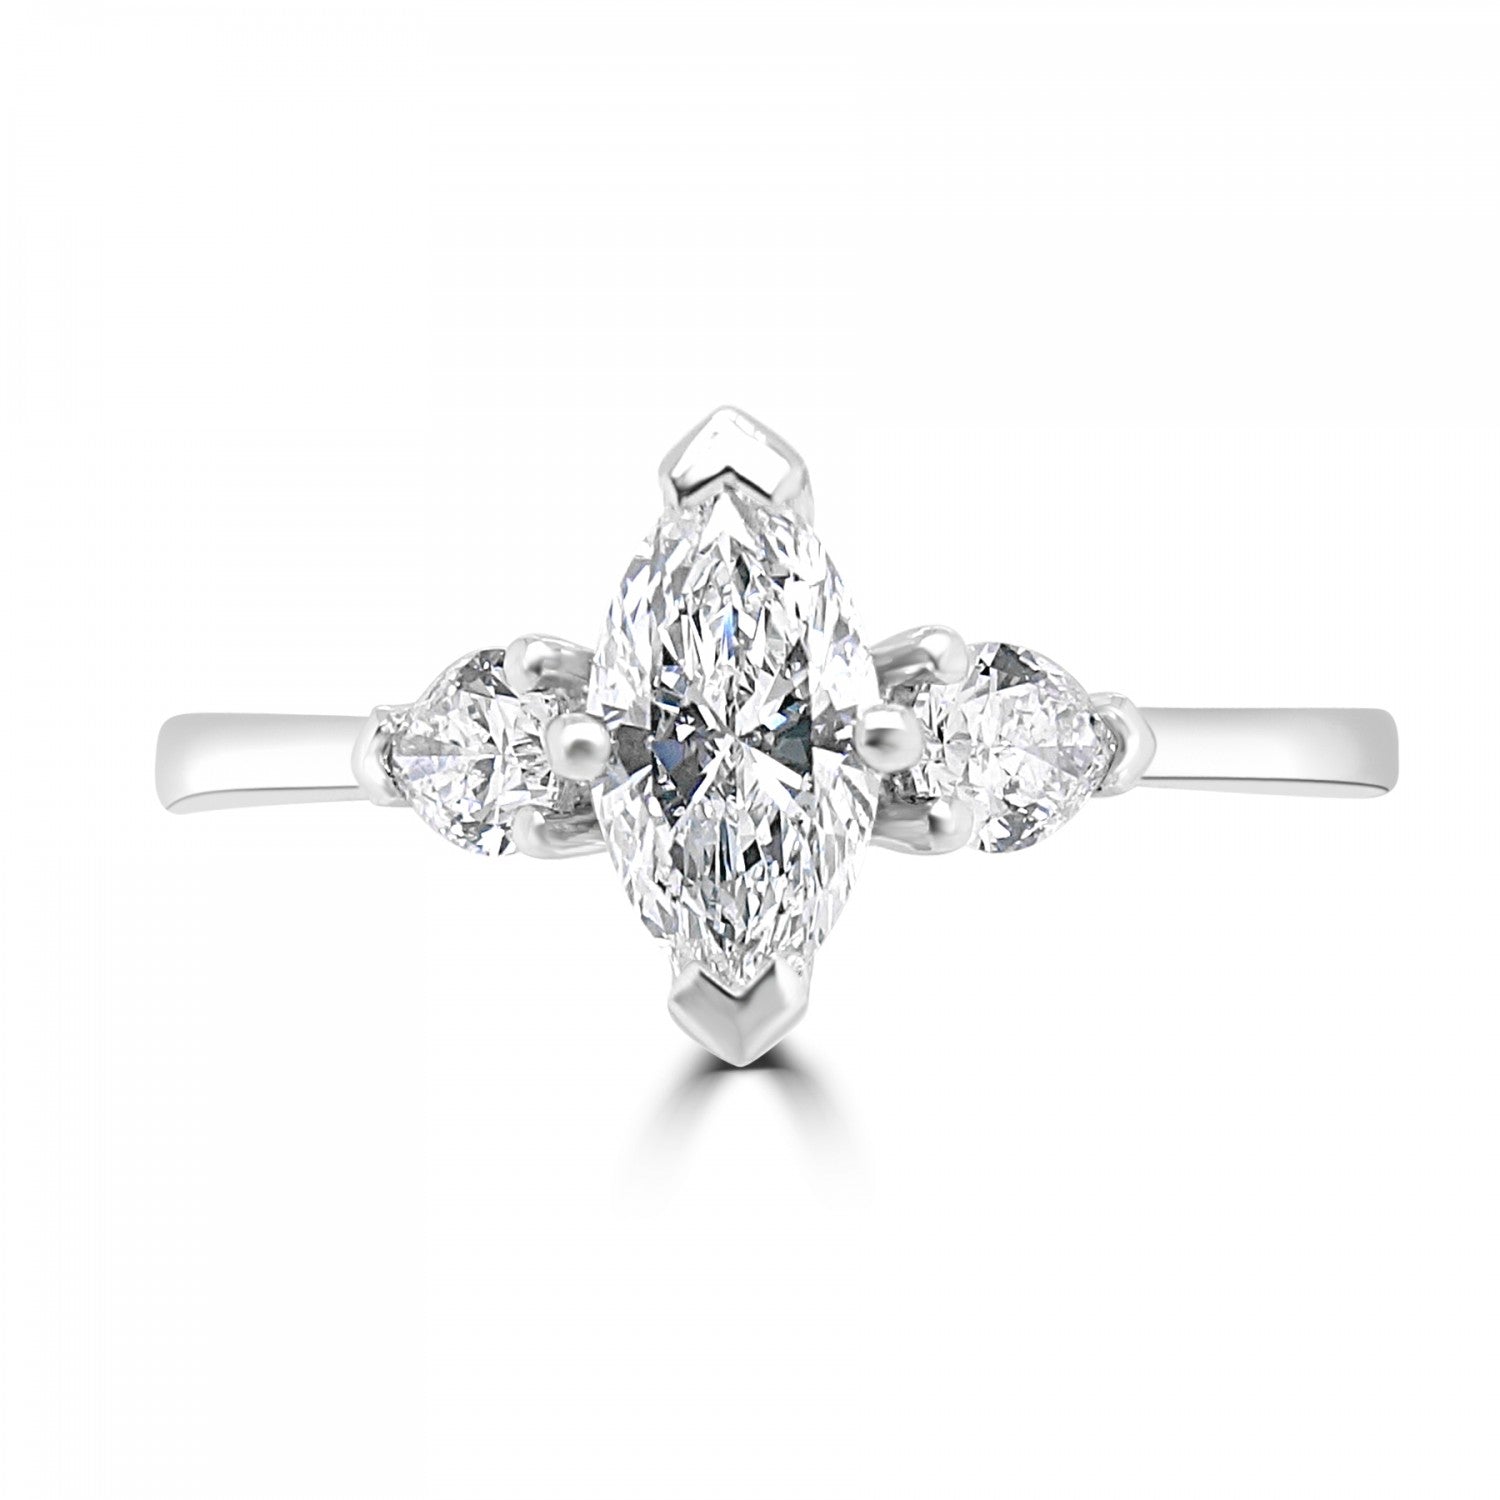 MARQUISE CUT DIAMOND  TRILOGY  ENGAGEMENT RING